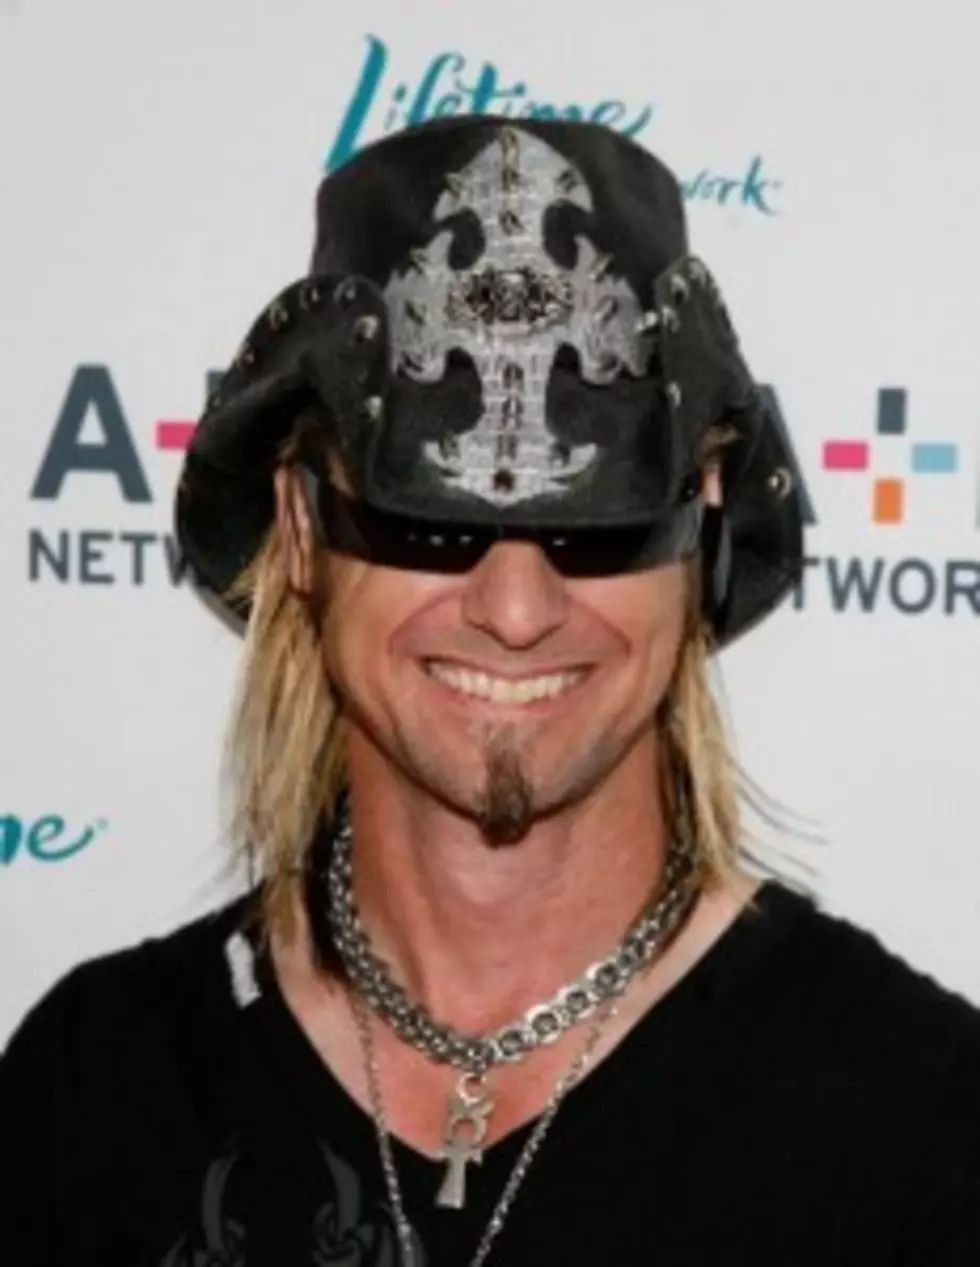 Billy the Exterminator and His Wife are Busted for Synthetic Pot